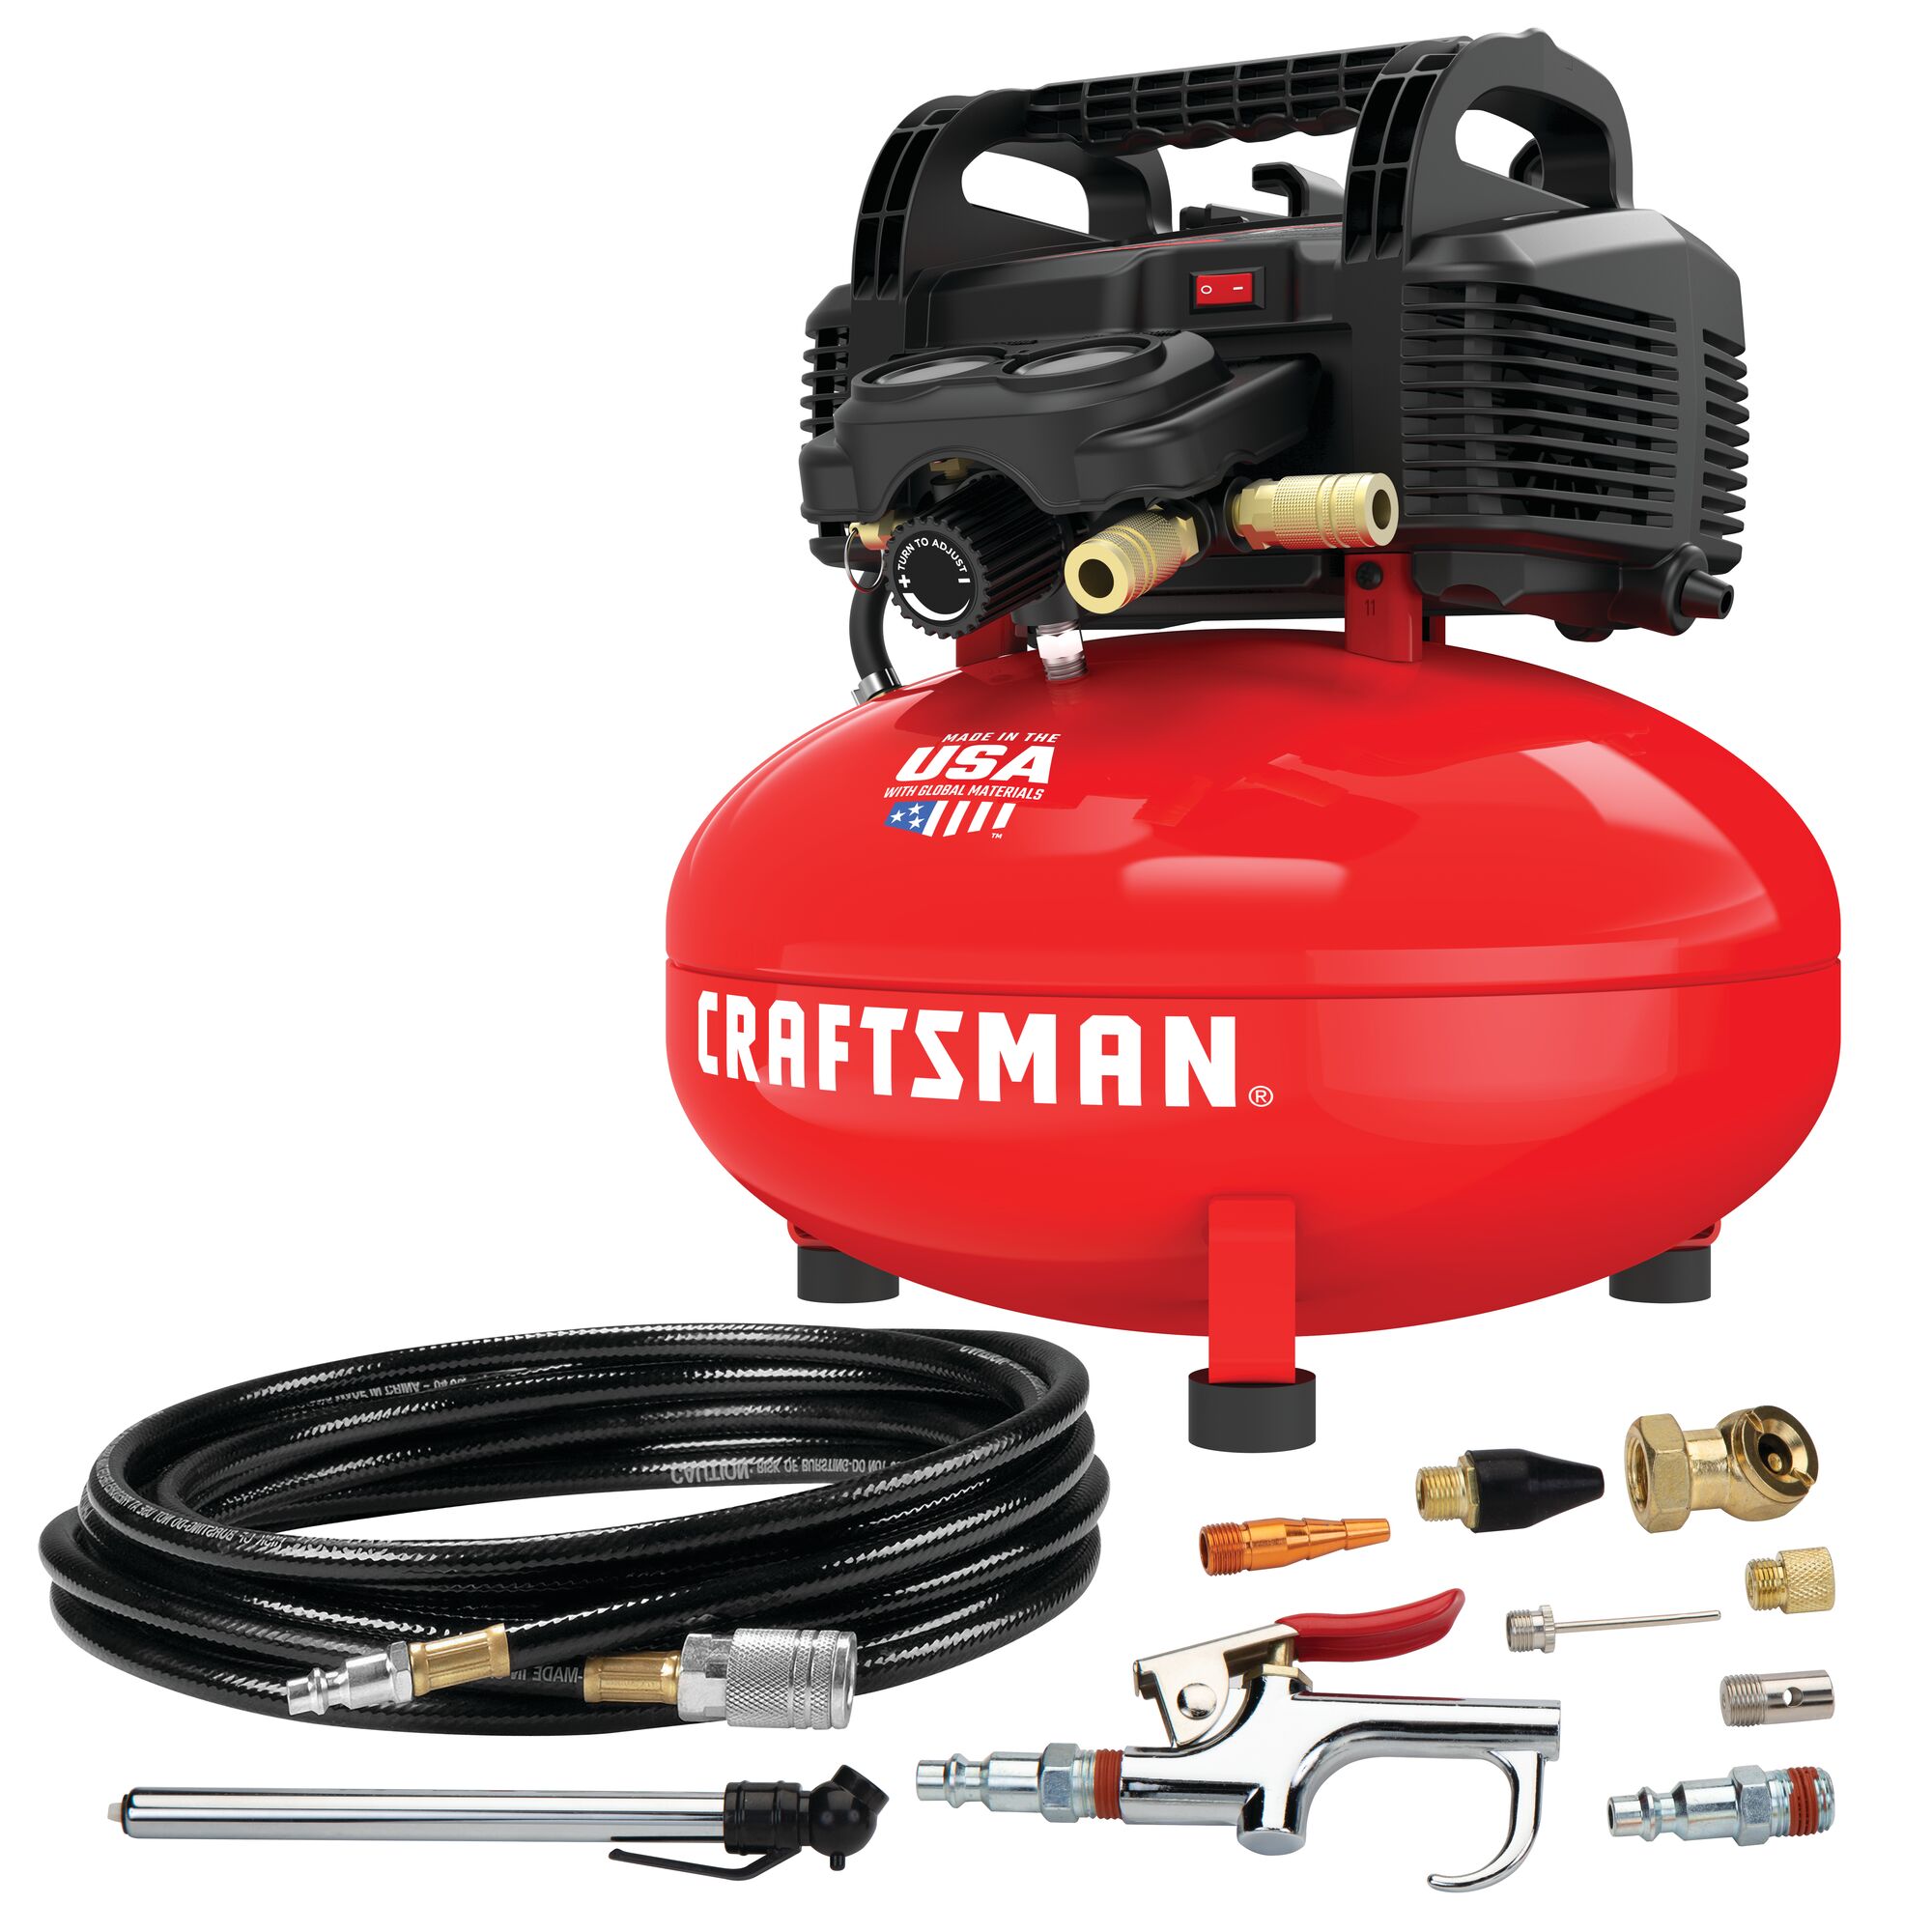 View of CRAFTSMAN Air Tools & Compressors on white background